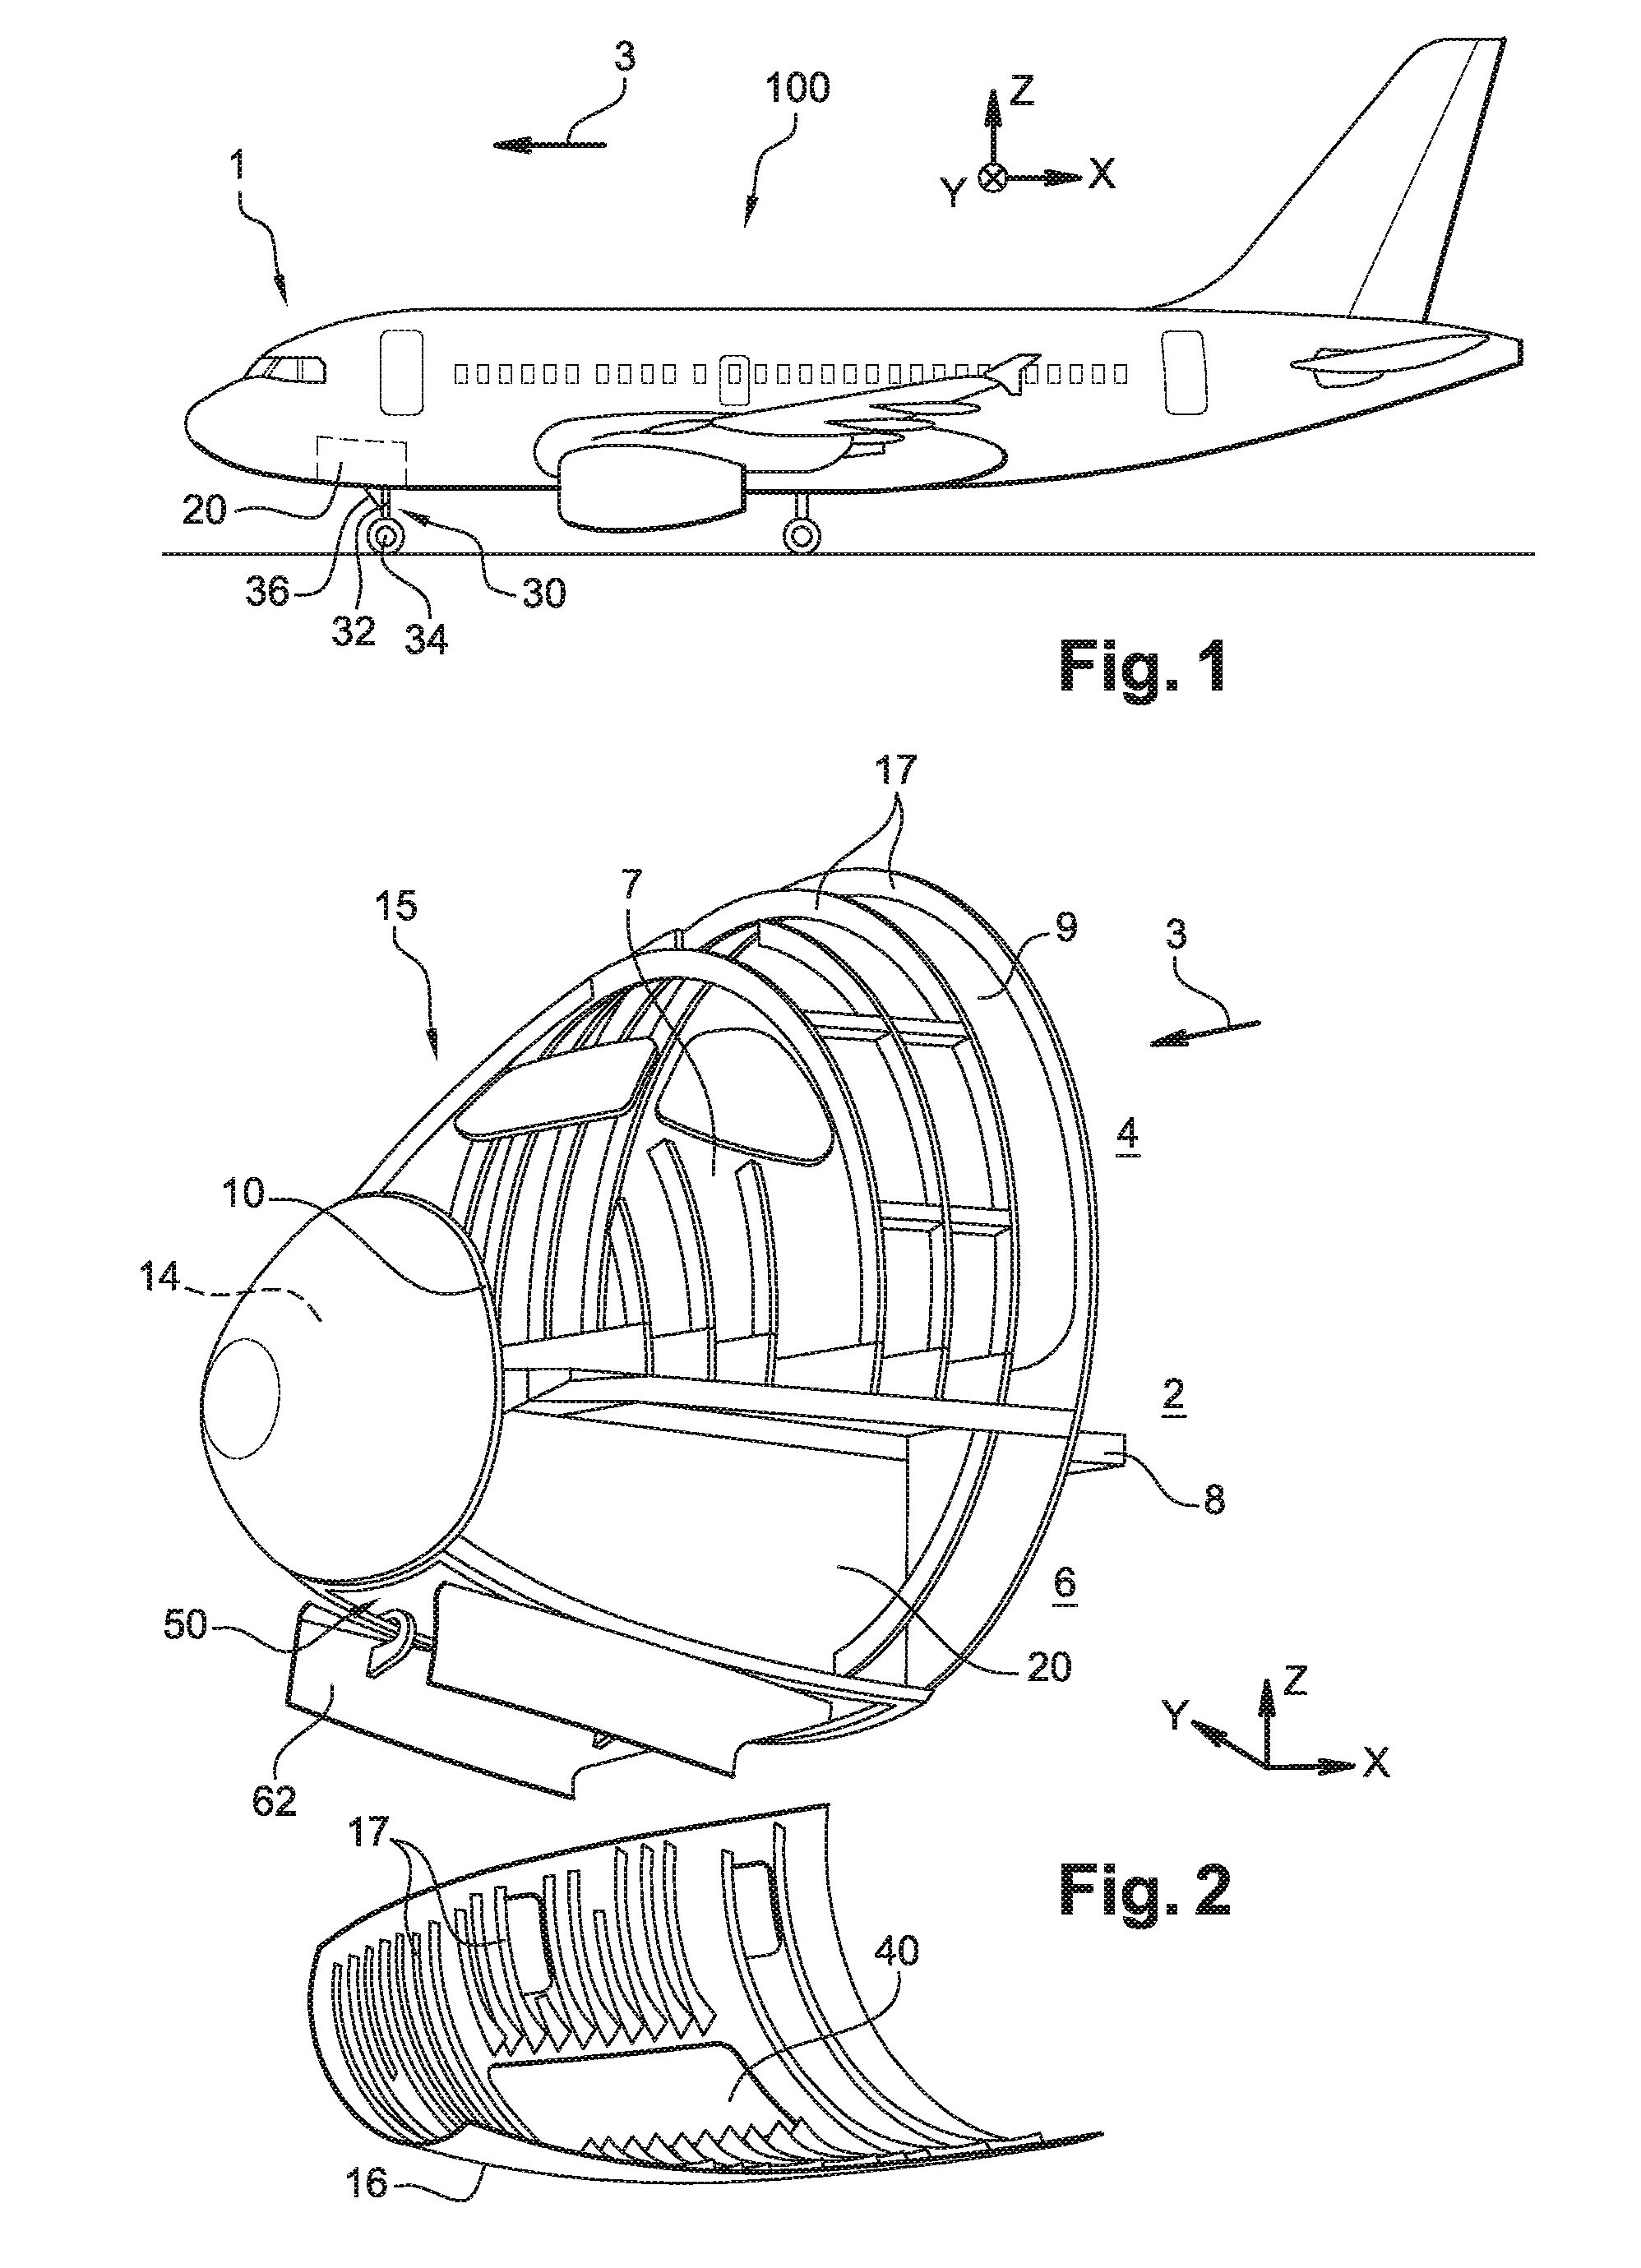 Aircraft nose provided with a connecting frame between the landing gear housing and the outer skin of the fuselage